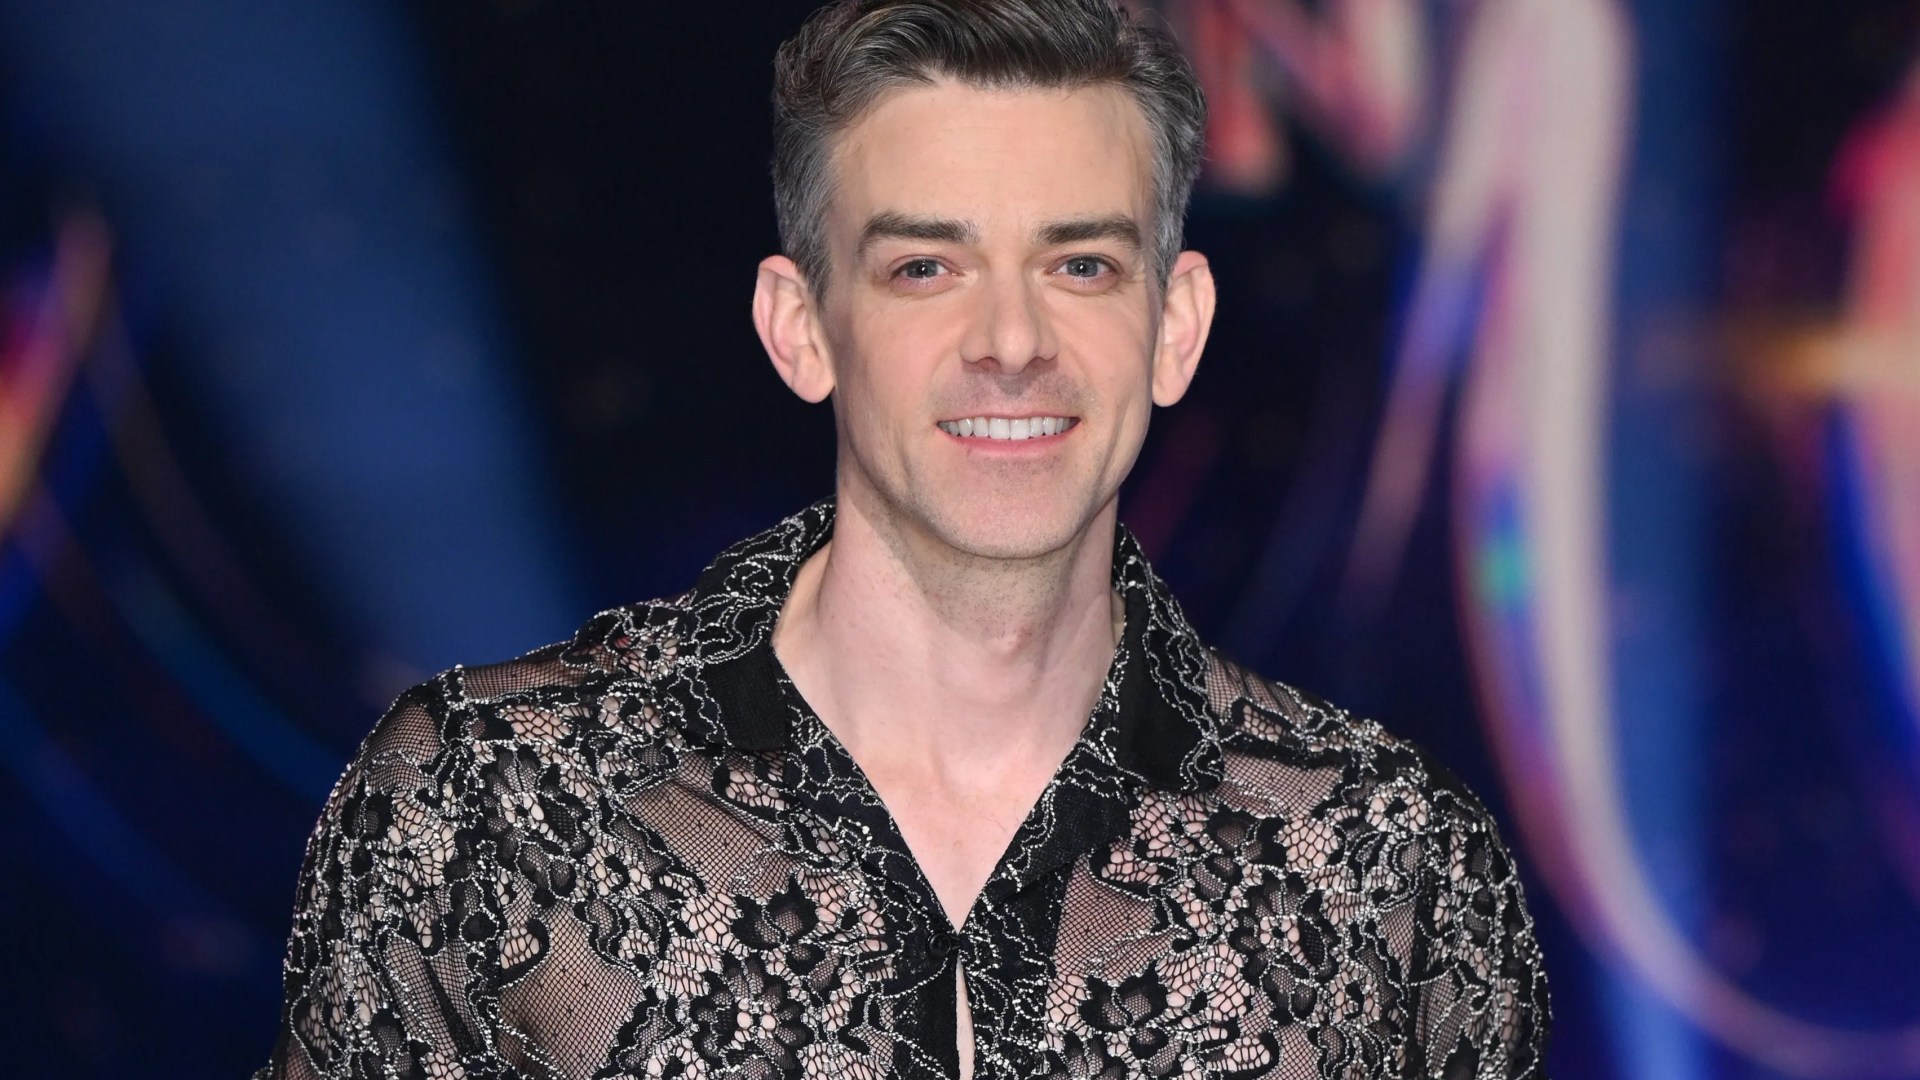 Meet Dancing On Ice pro Brendyn Hatfield – Husband material or single and ready to mingle?